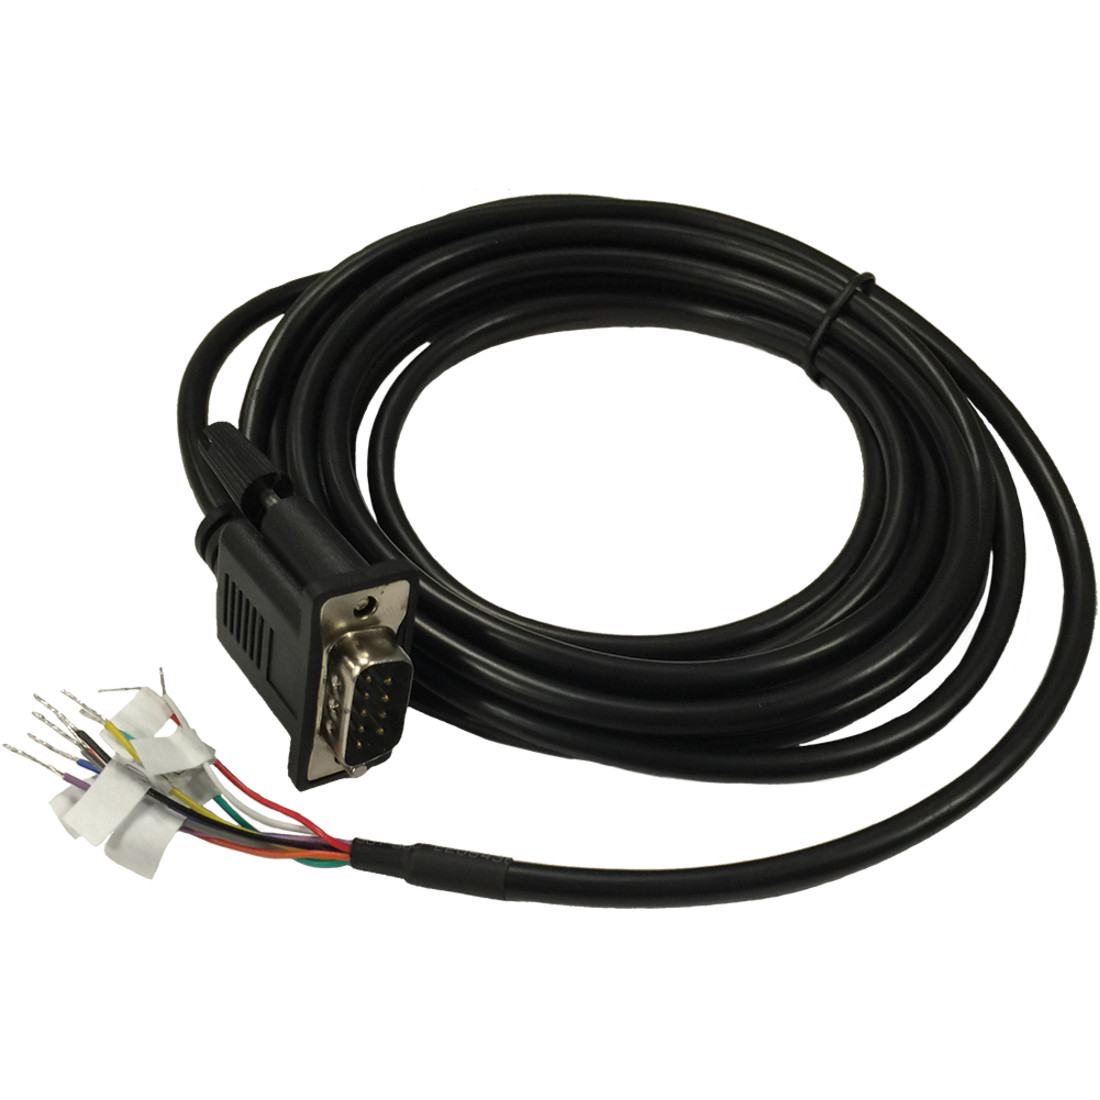 CradlePoint Serial DB9 To GPIO Cable, 3M9.84 ft Serial Data Transfer CableFirst End: 1 x 9-pin DB-9 Serial 170676-000